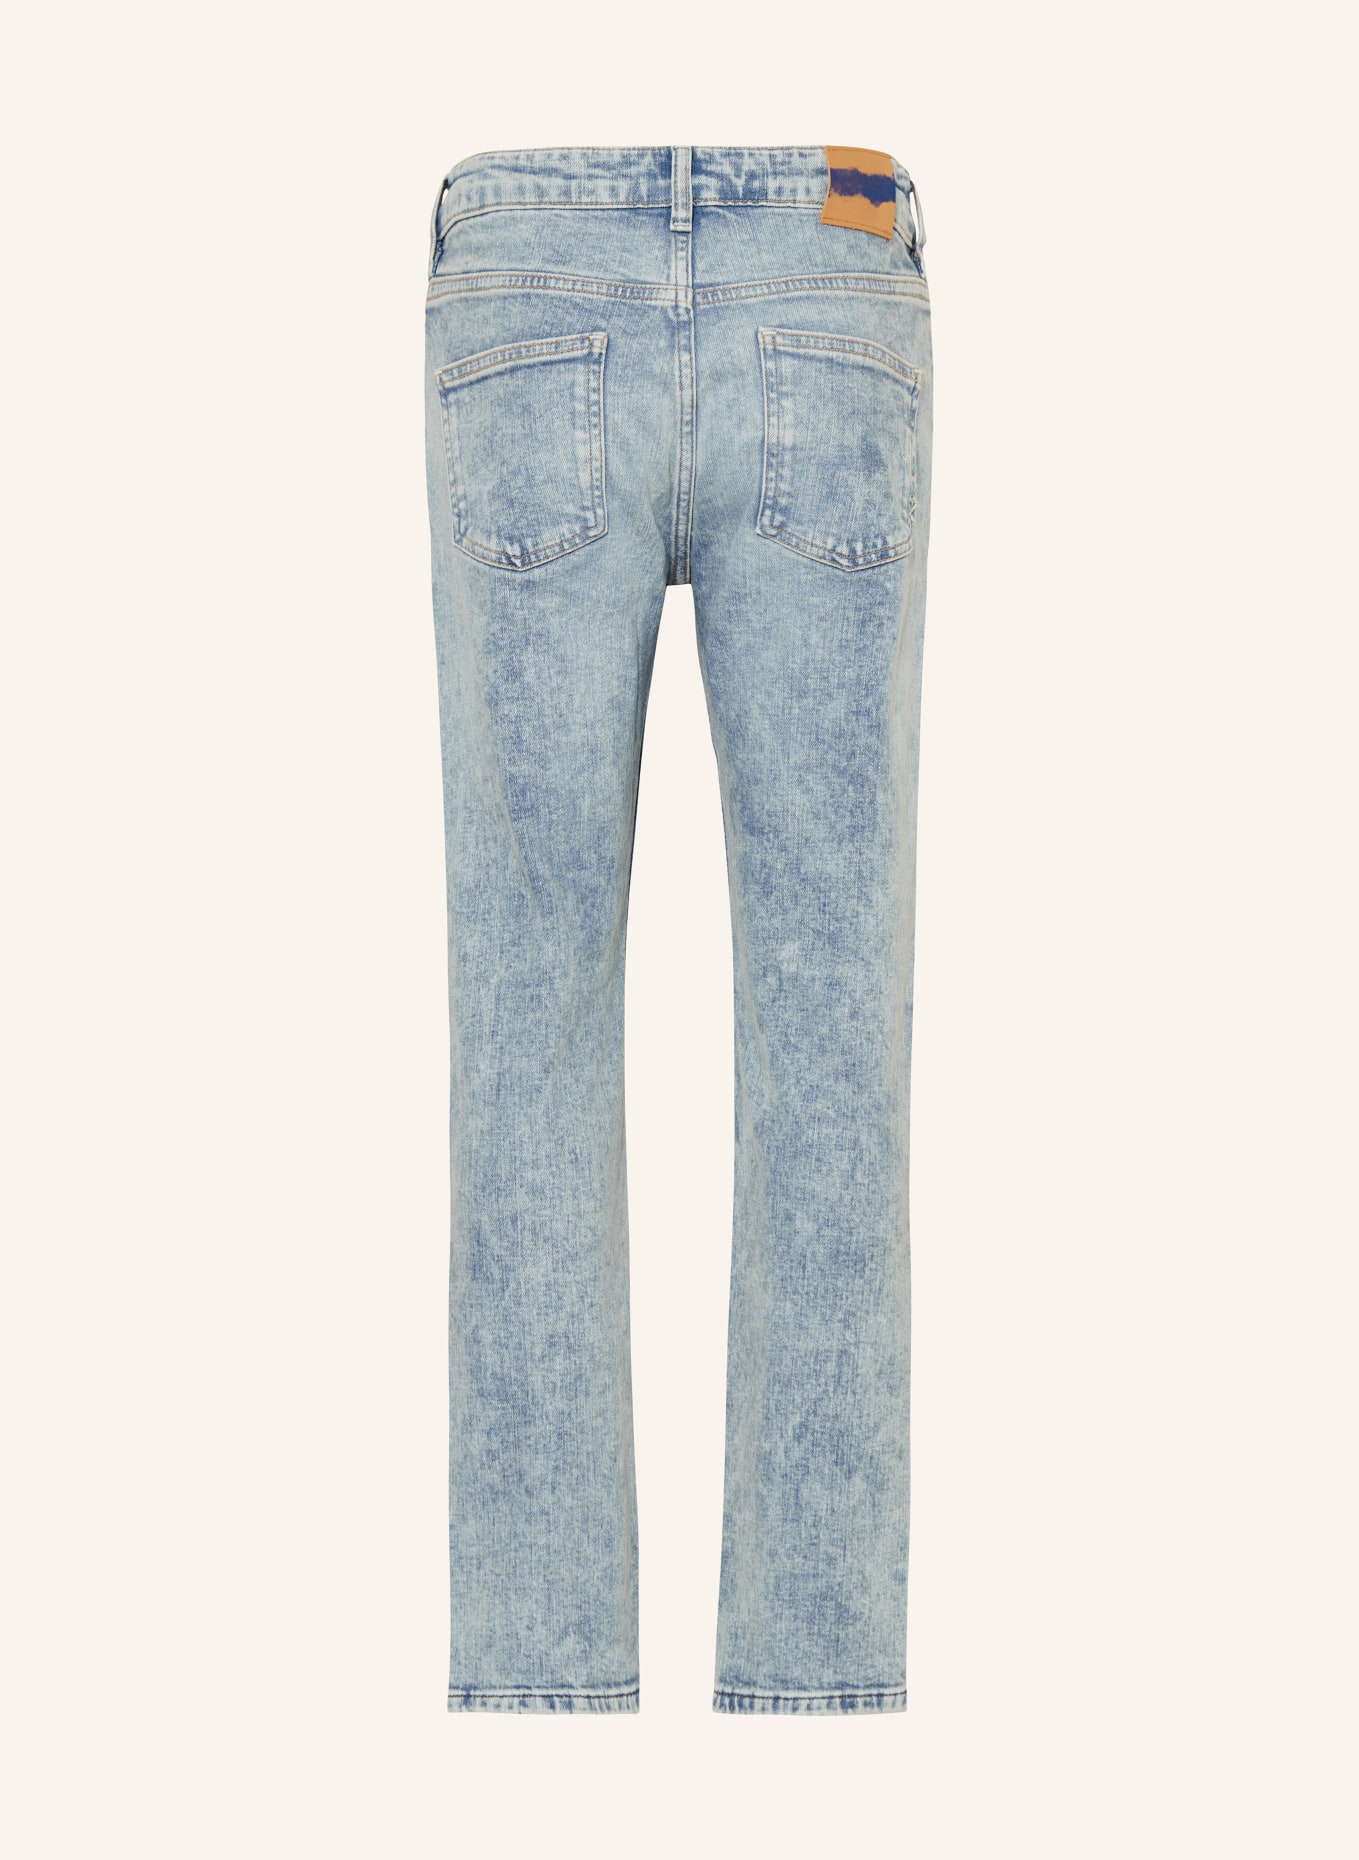 SCOTCH & SODA Jeans THE DEAN Loose Tapered Fit, Farbe: 7082 Freshen Up (Bild 2)